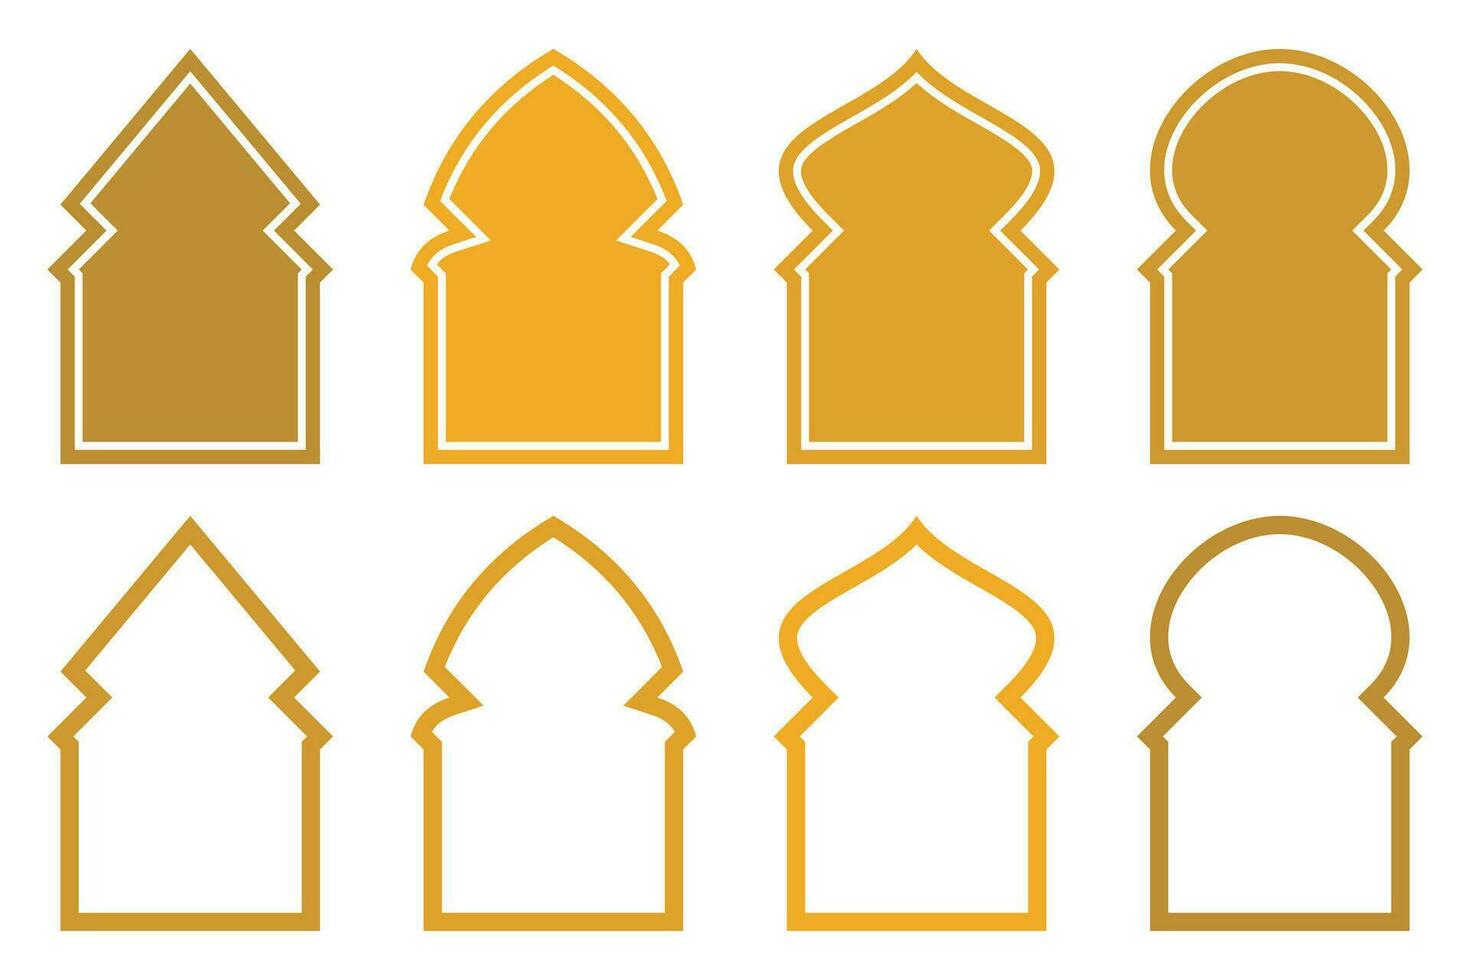 Set of islamic style illustrations of silhouettes and lines. Stylish design of doors, windows, domes, mosques, lanterns, vector for islamic holidays.